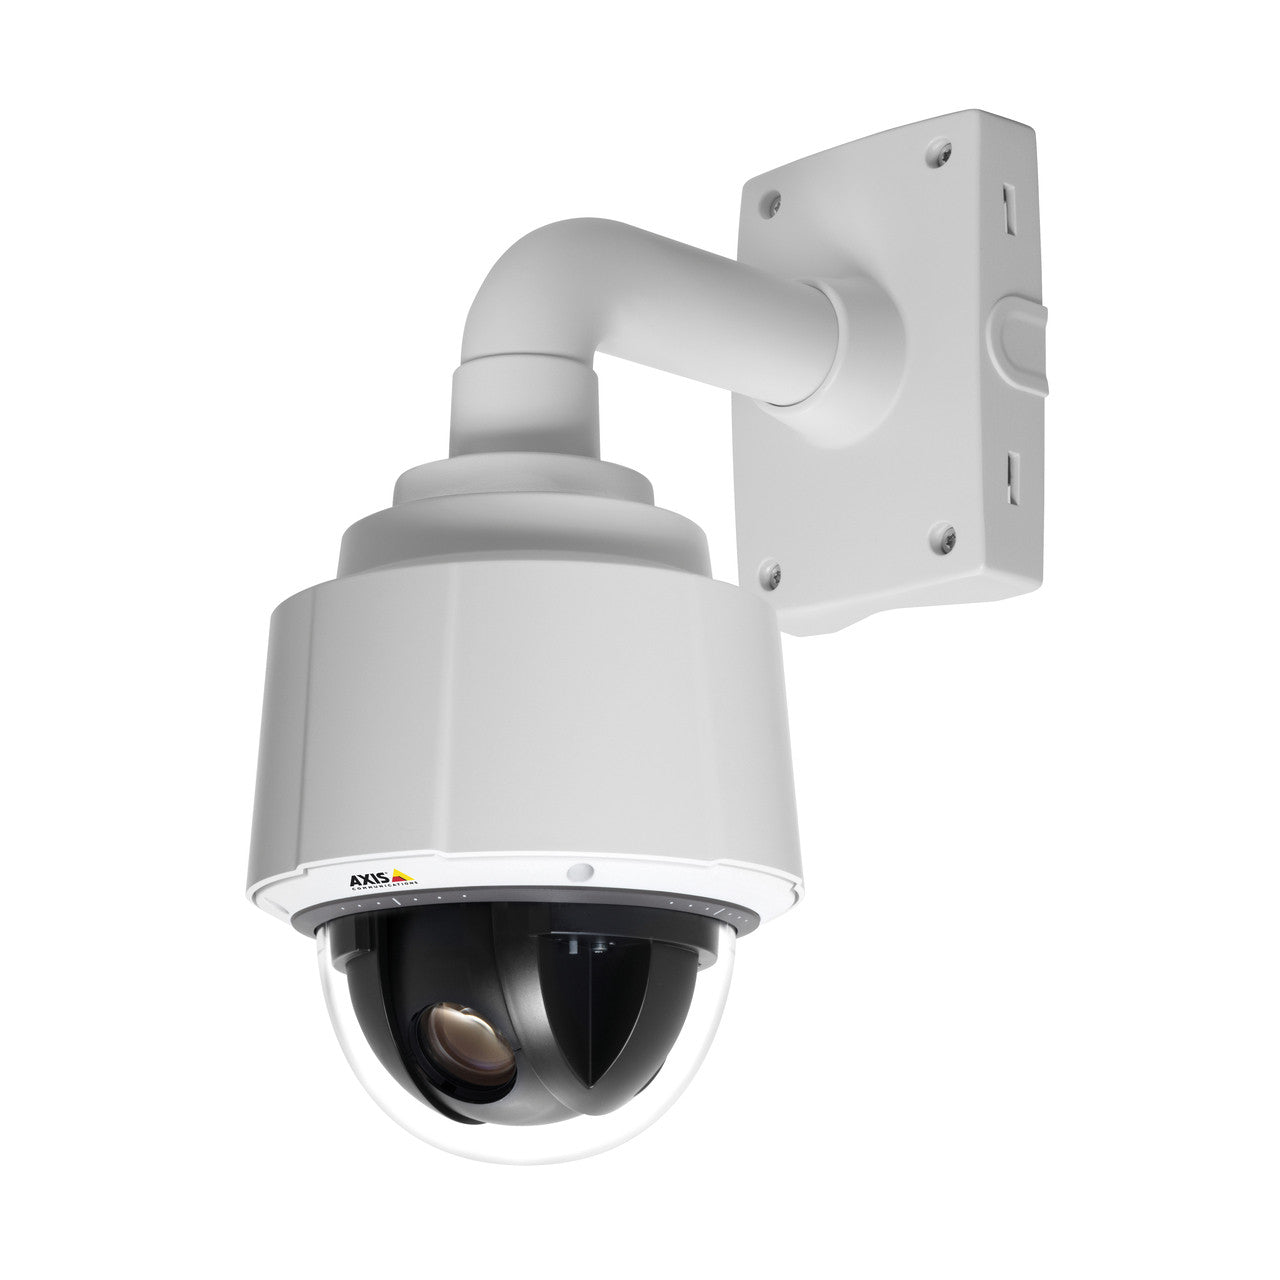 AXIS Q6042 with optional T91A61 Wall Bracket